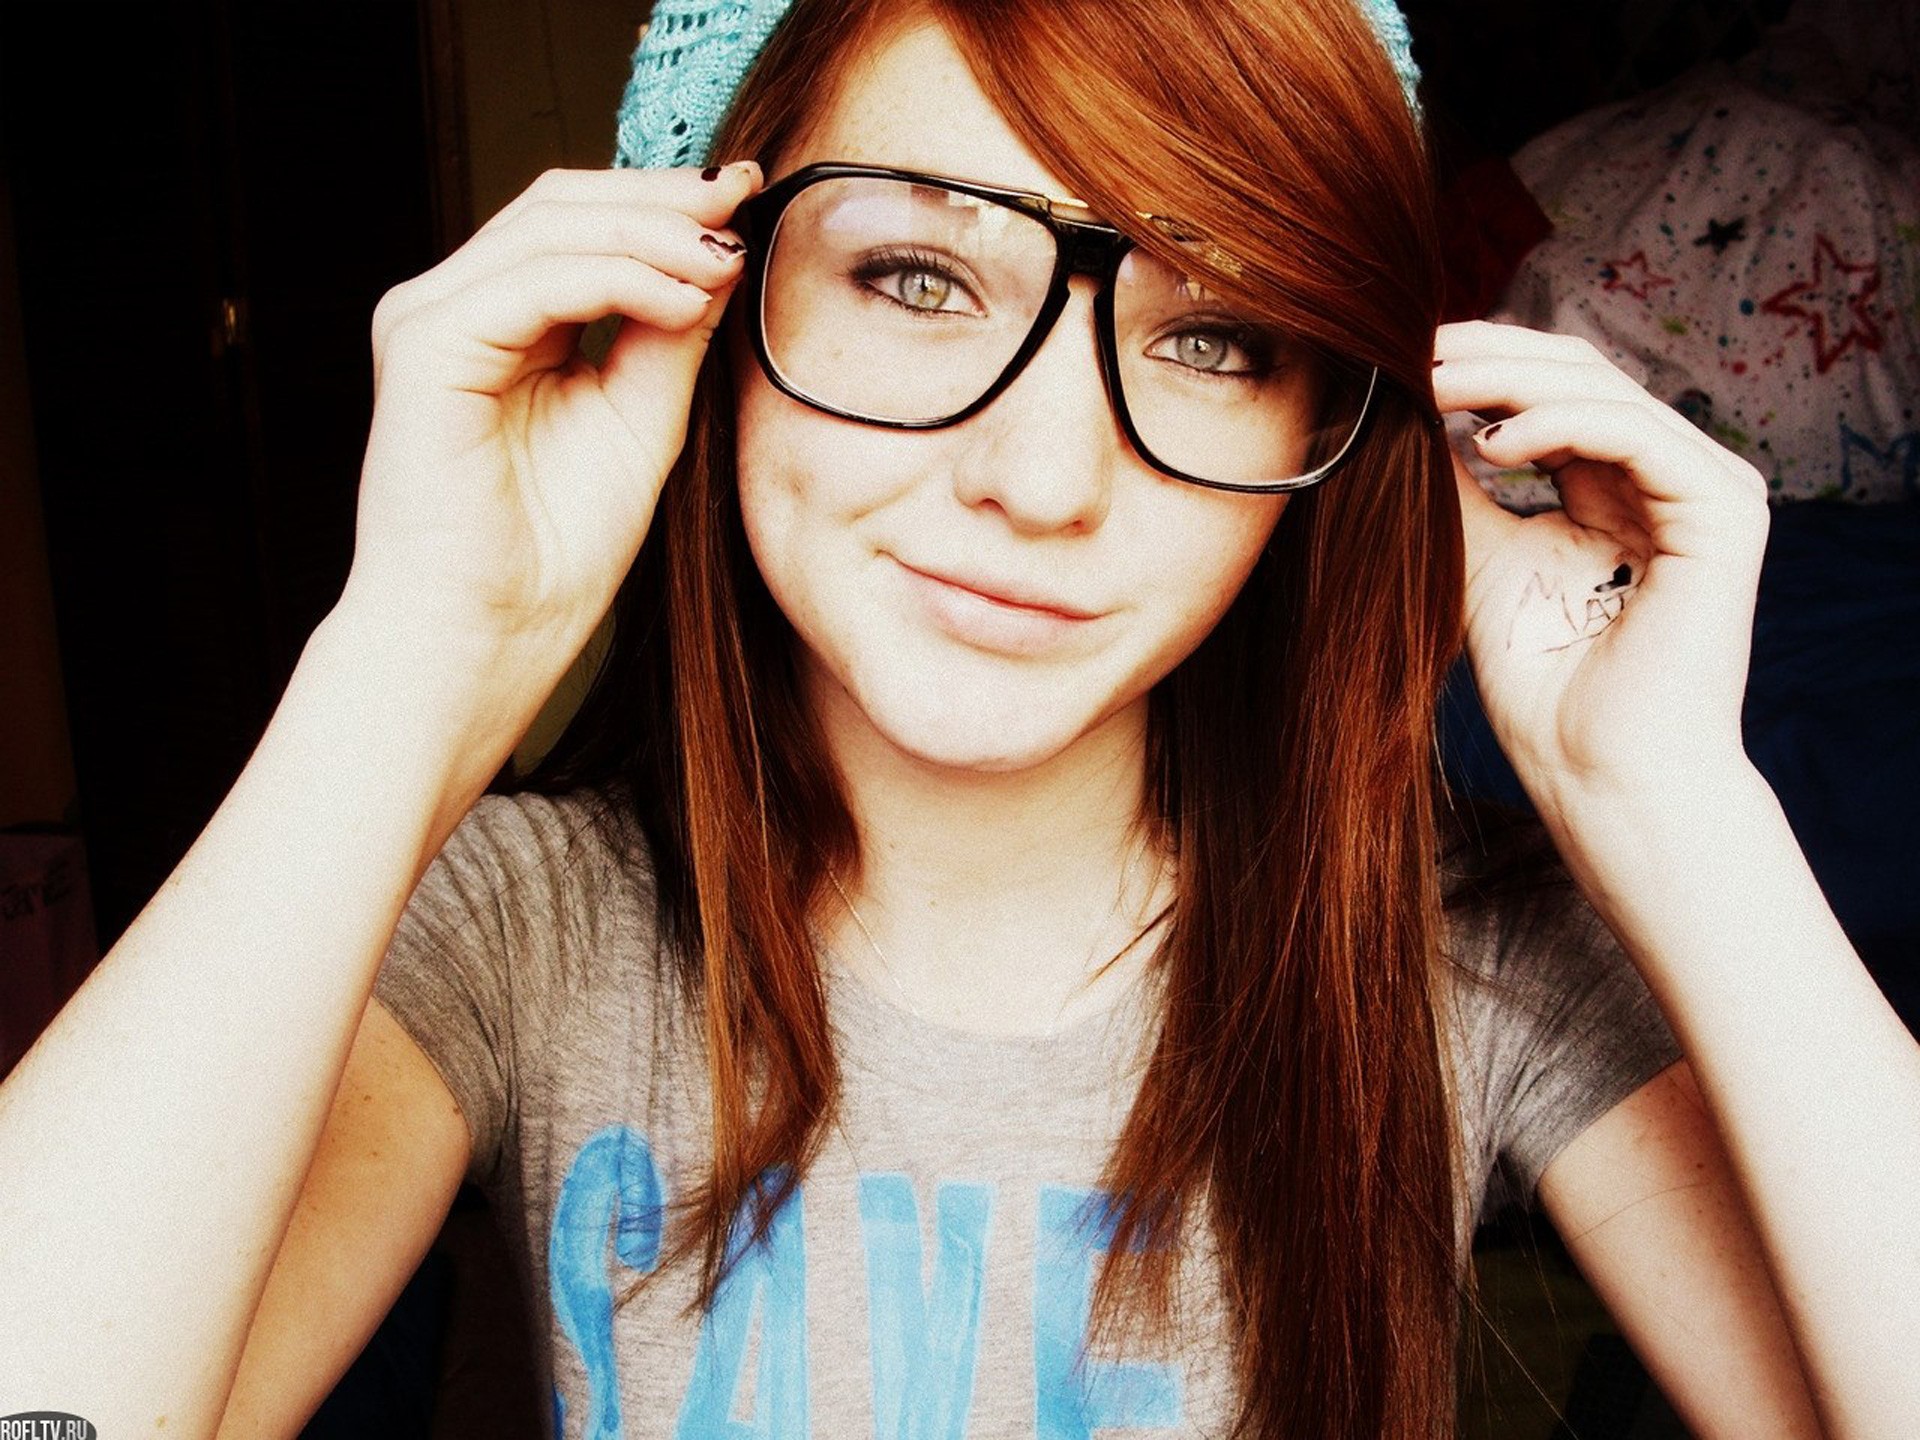 Girls With Glasses